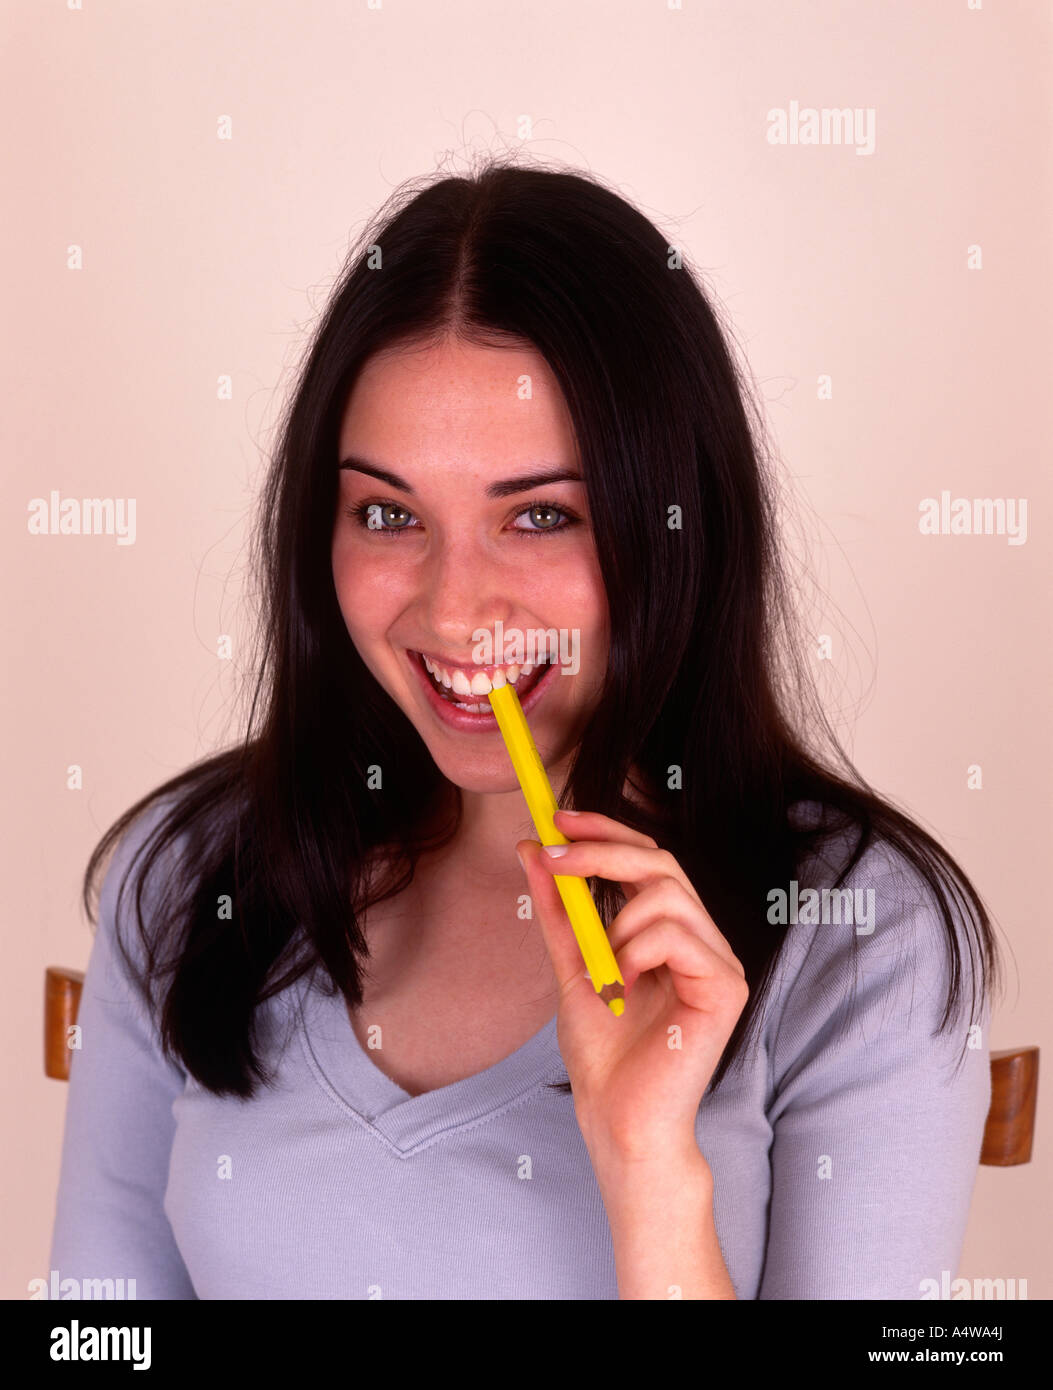 DARK HAIRED GIRL IN BLUE TOP YELLOW PENCIL TO MOUTH Stock Photo